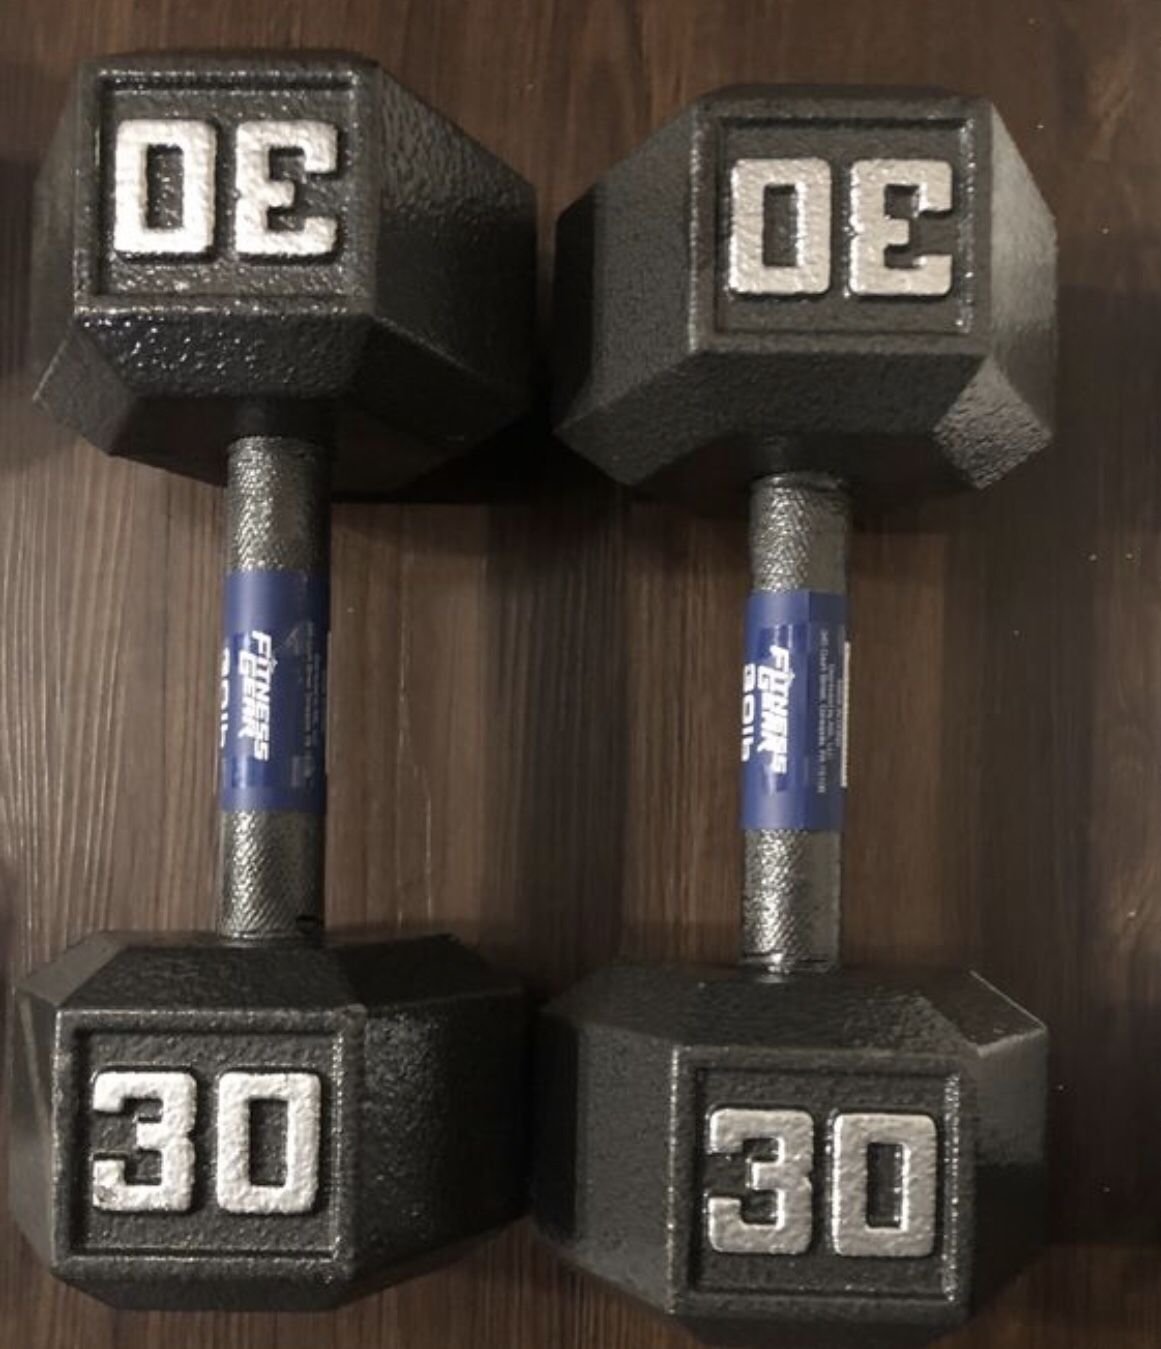 Dumbbells 💪 (2x30Lbs) for $120 Firm on Price